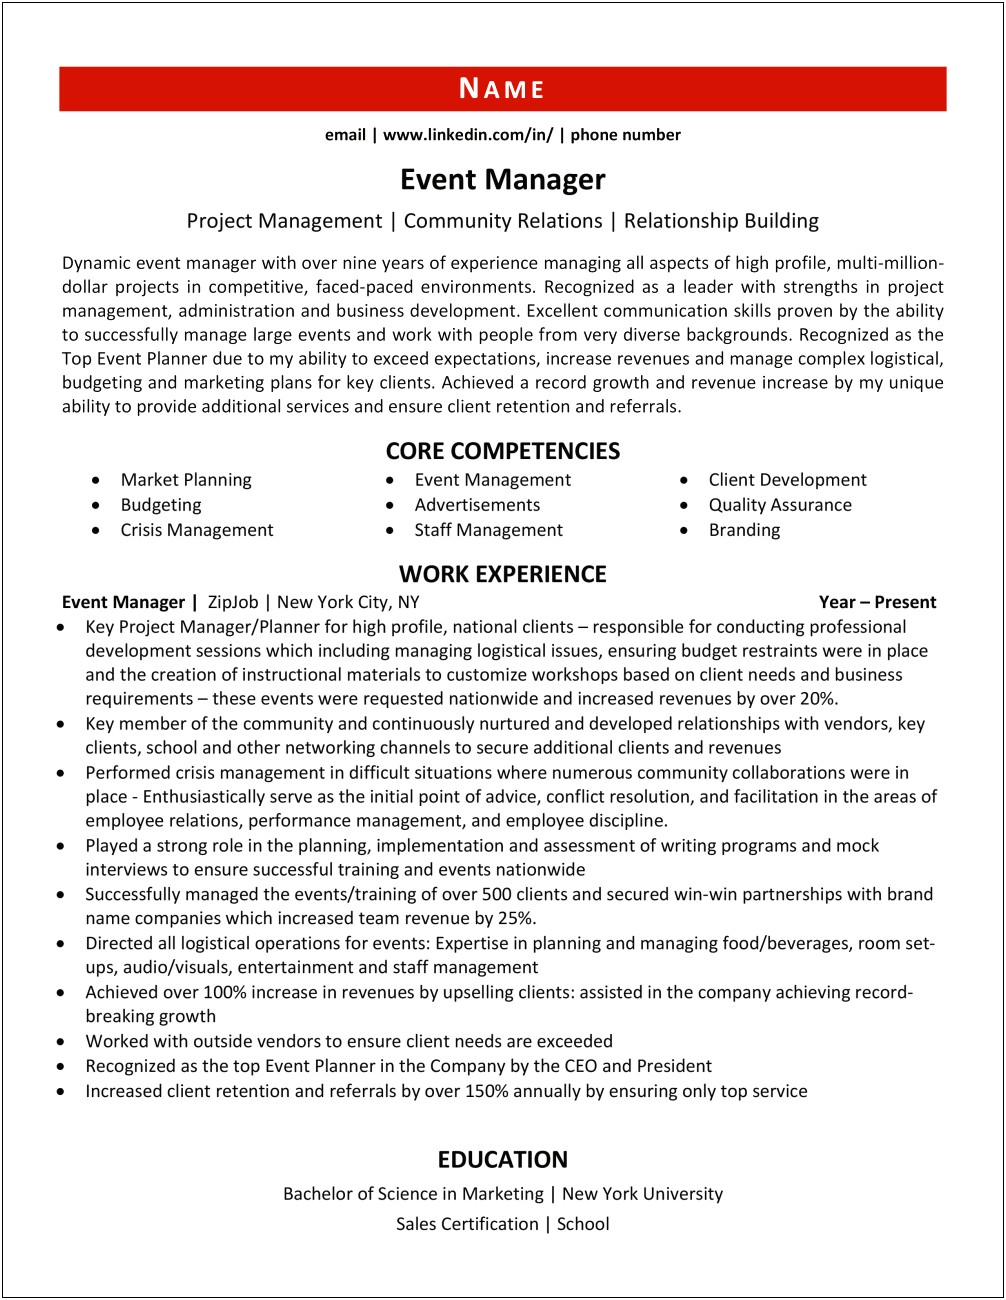 Event Manager Resume 7 Years Experience